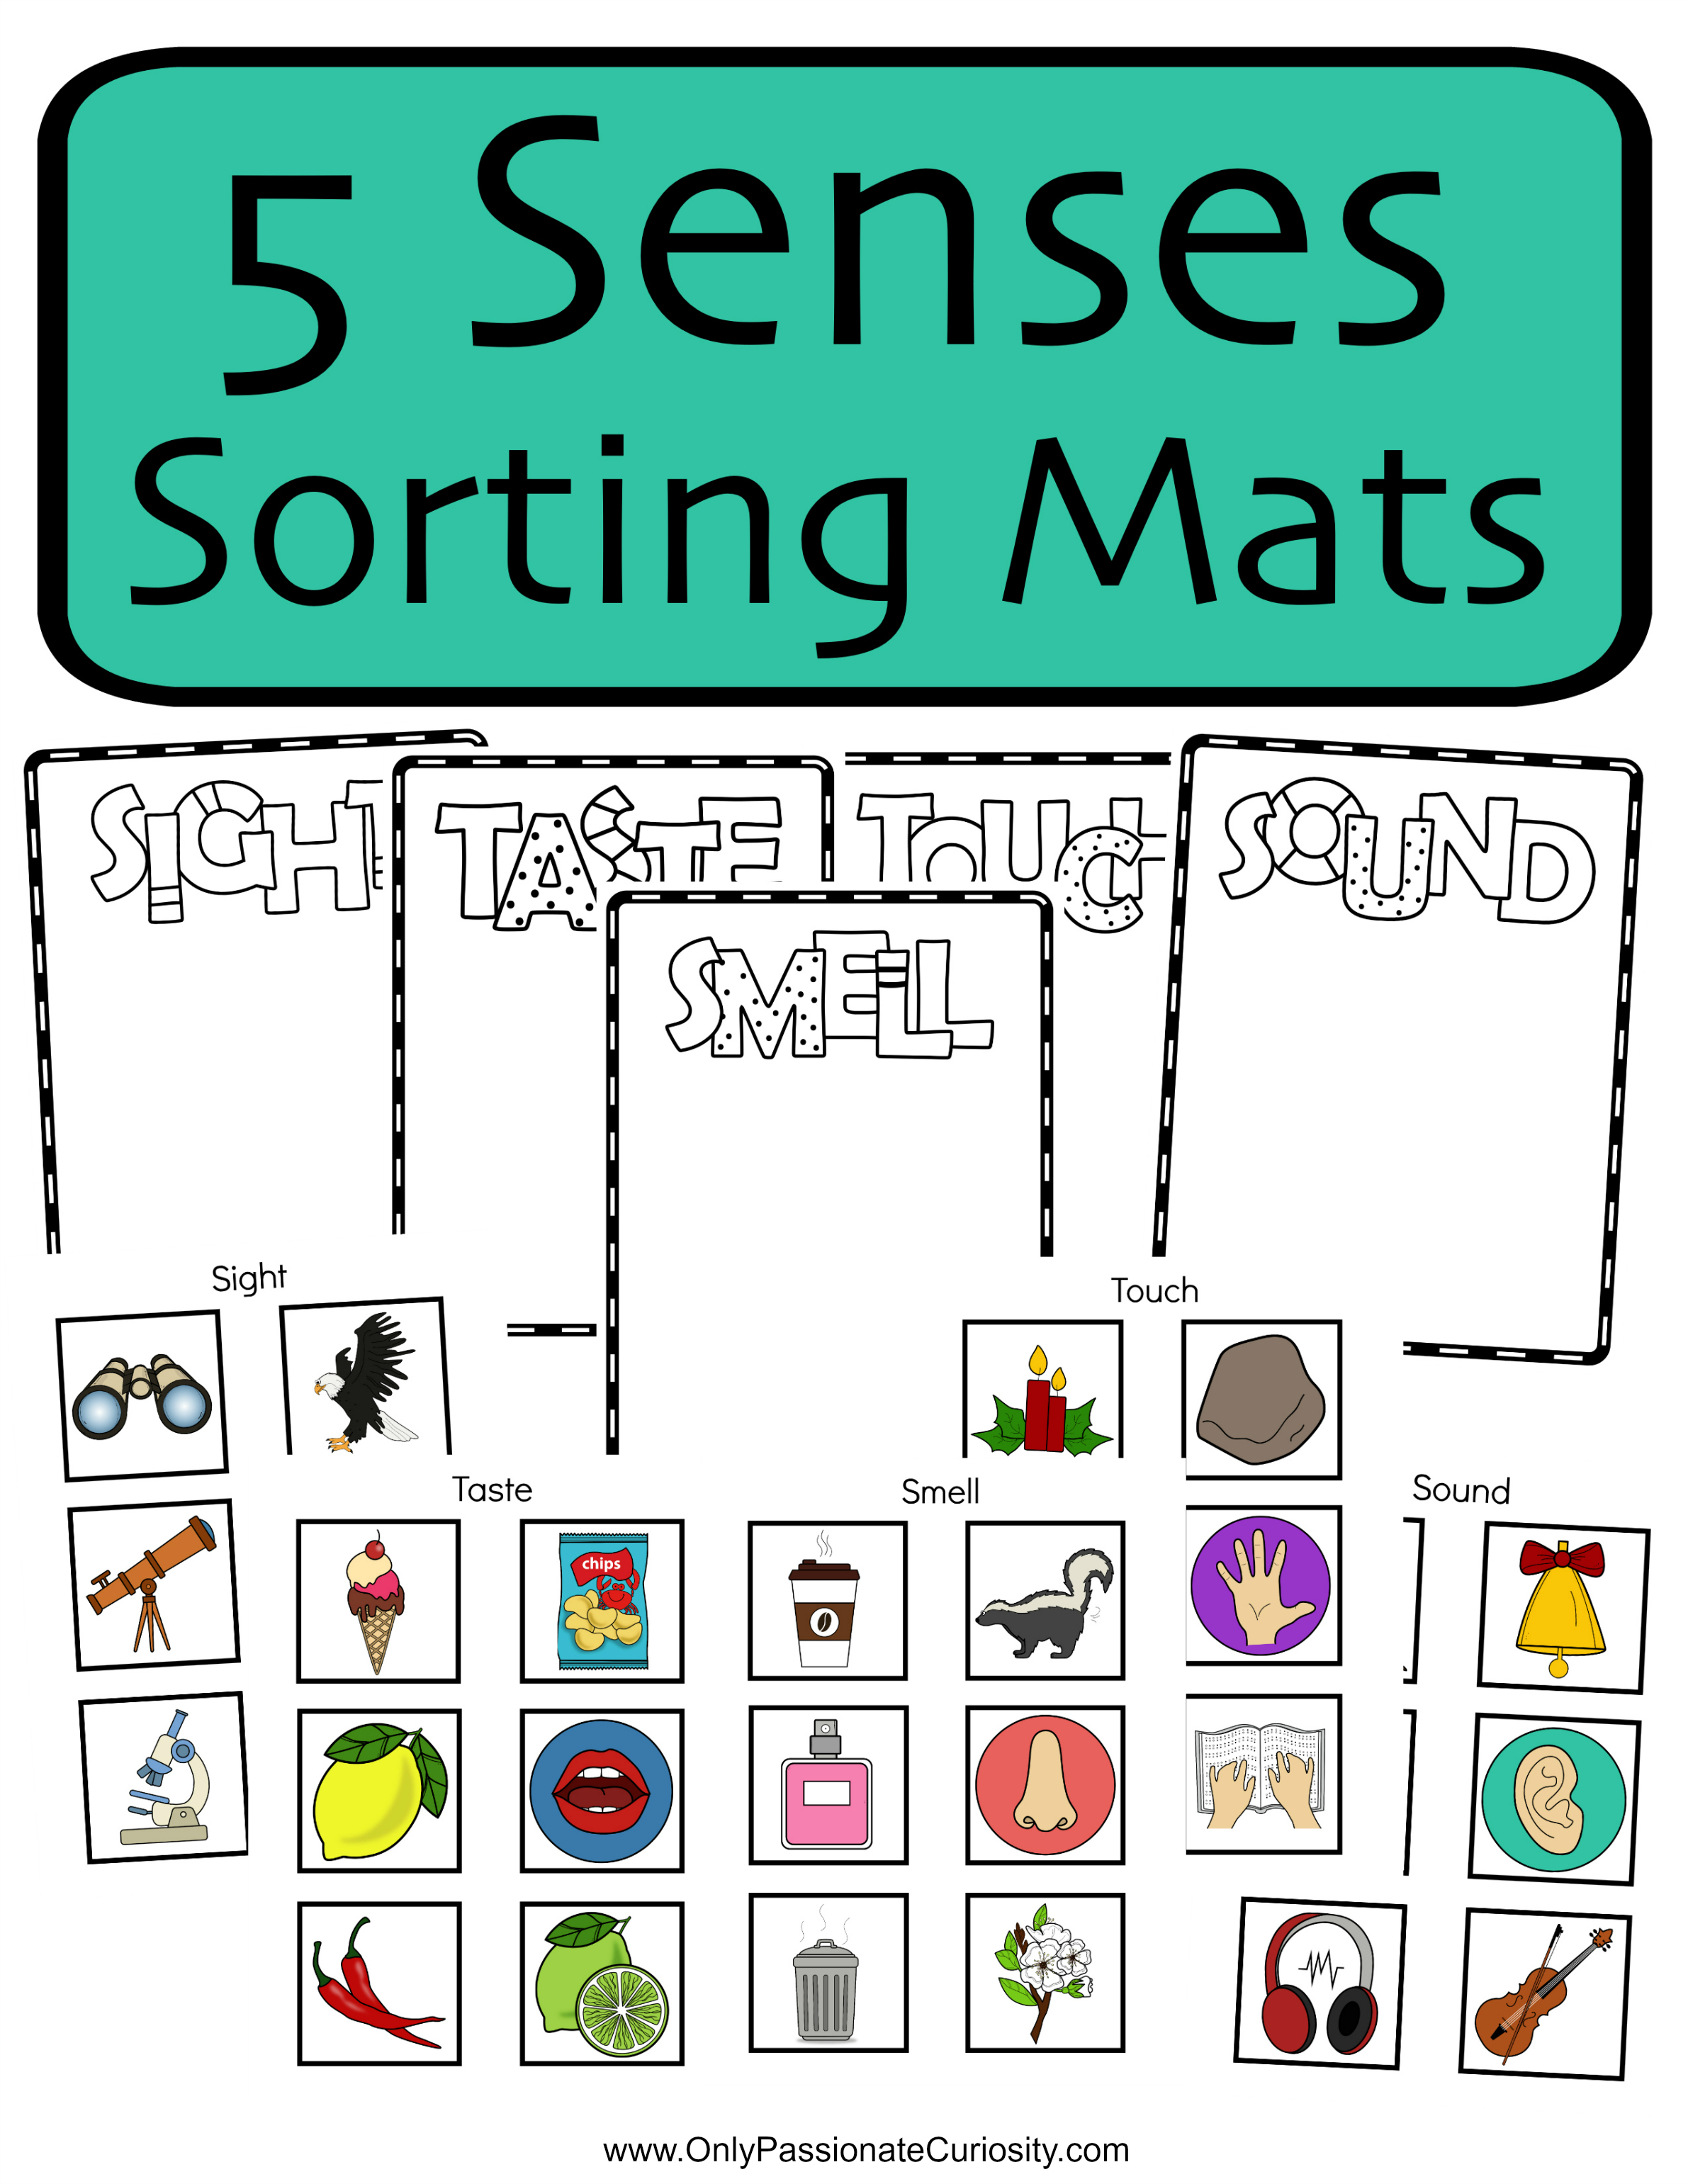 sorting-mats-worksheets-the-5-senses-only-passionate-curiosity